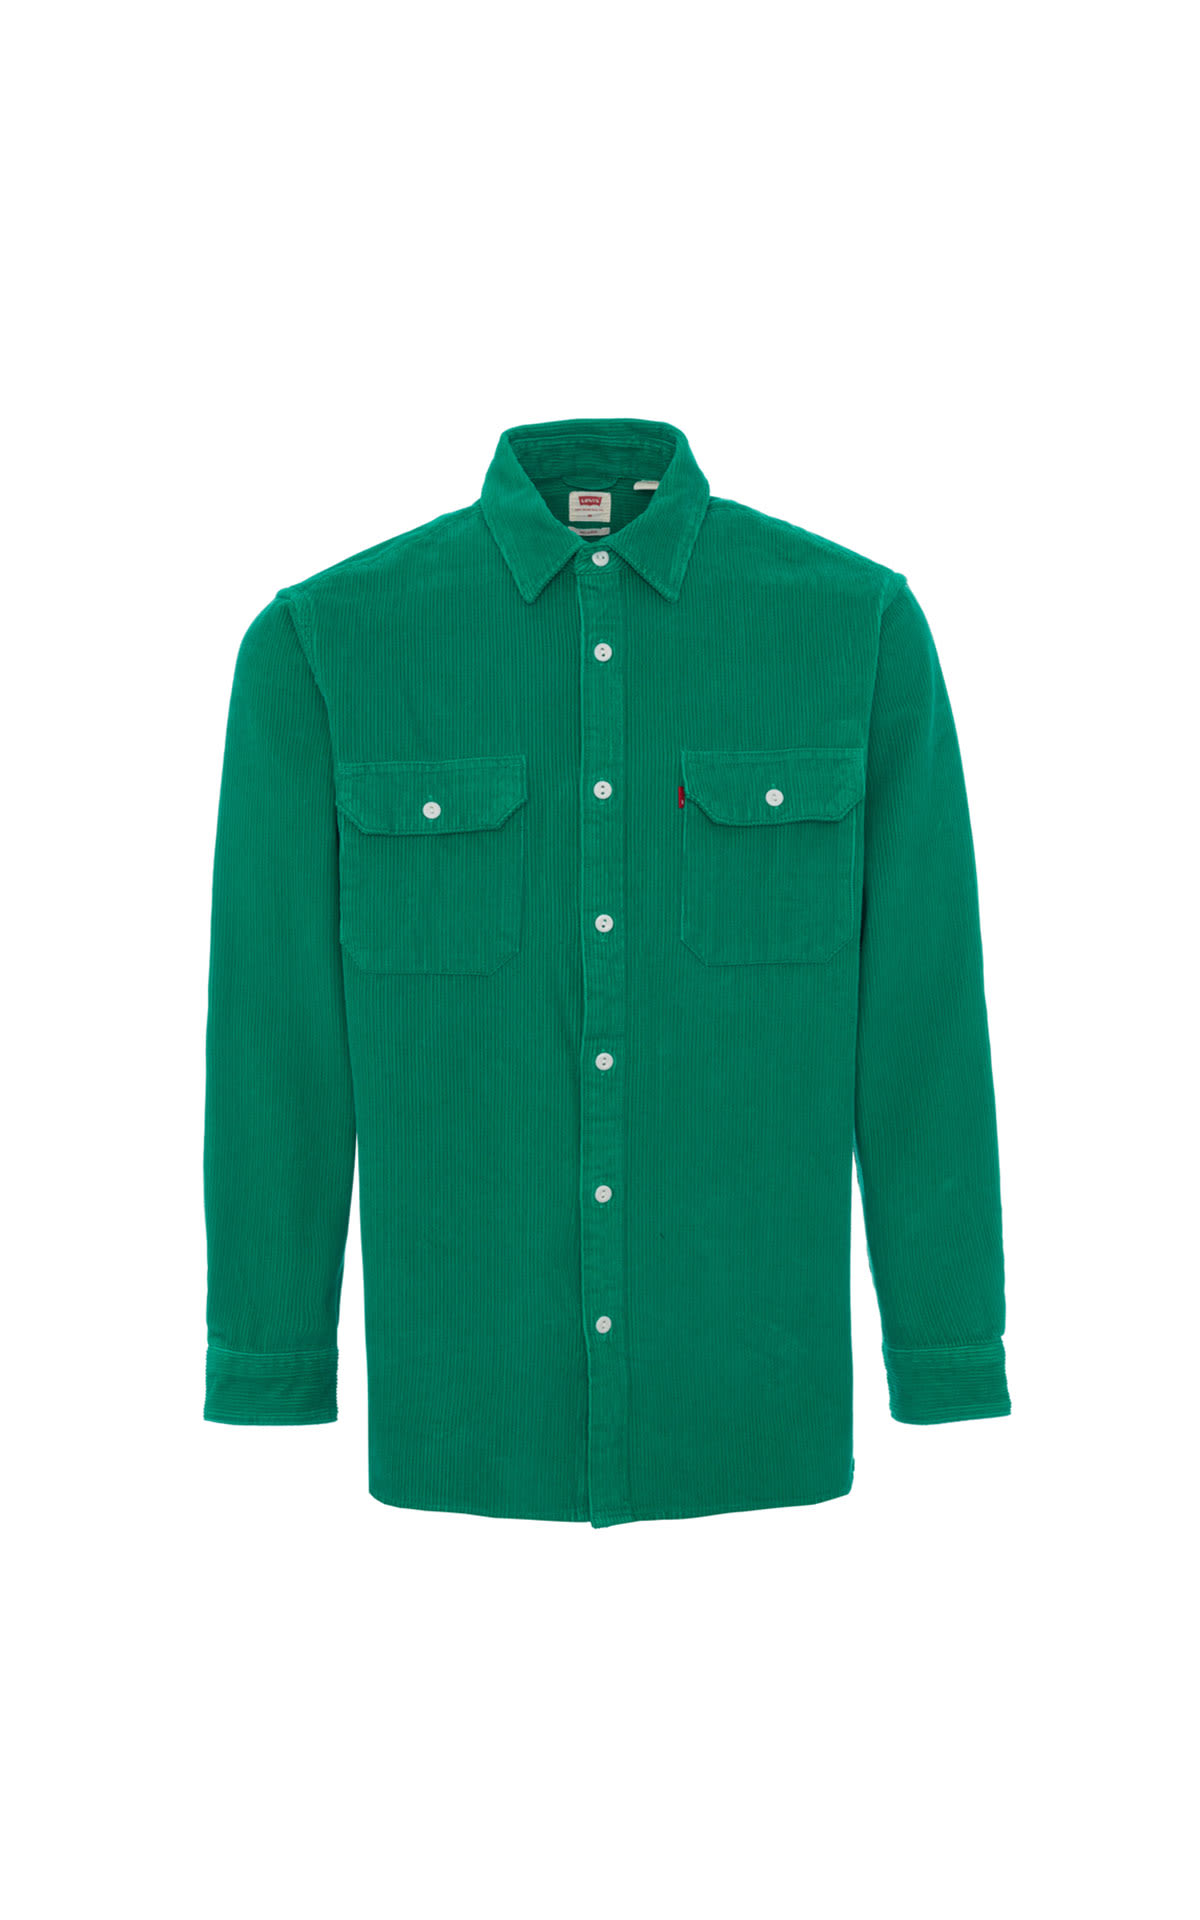 Levi's Relaxed shirt oversized from Bicester Village